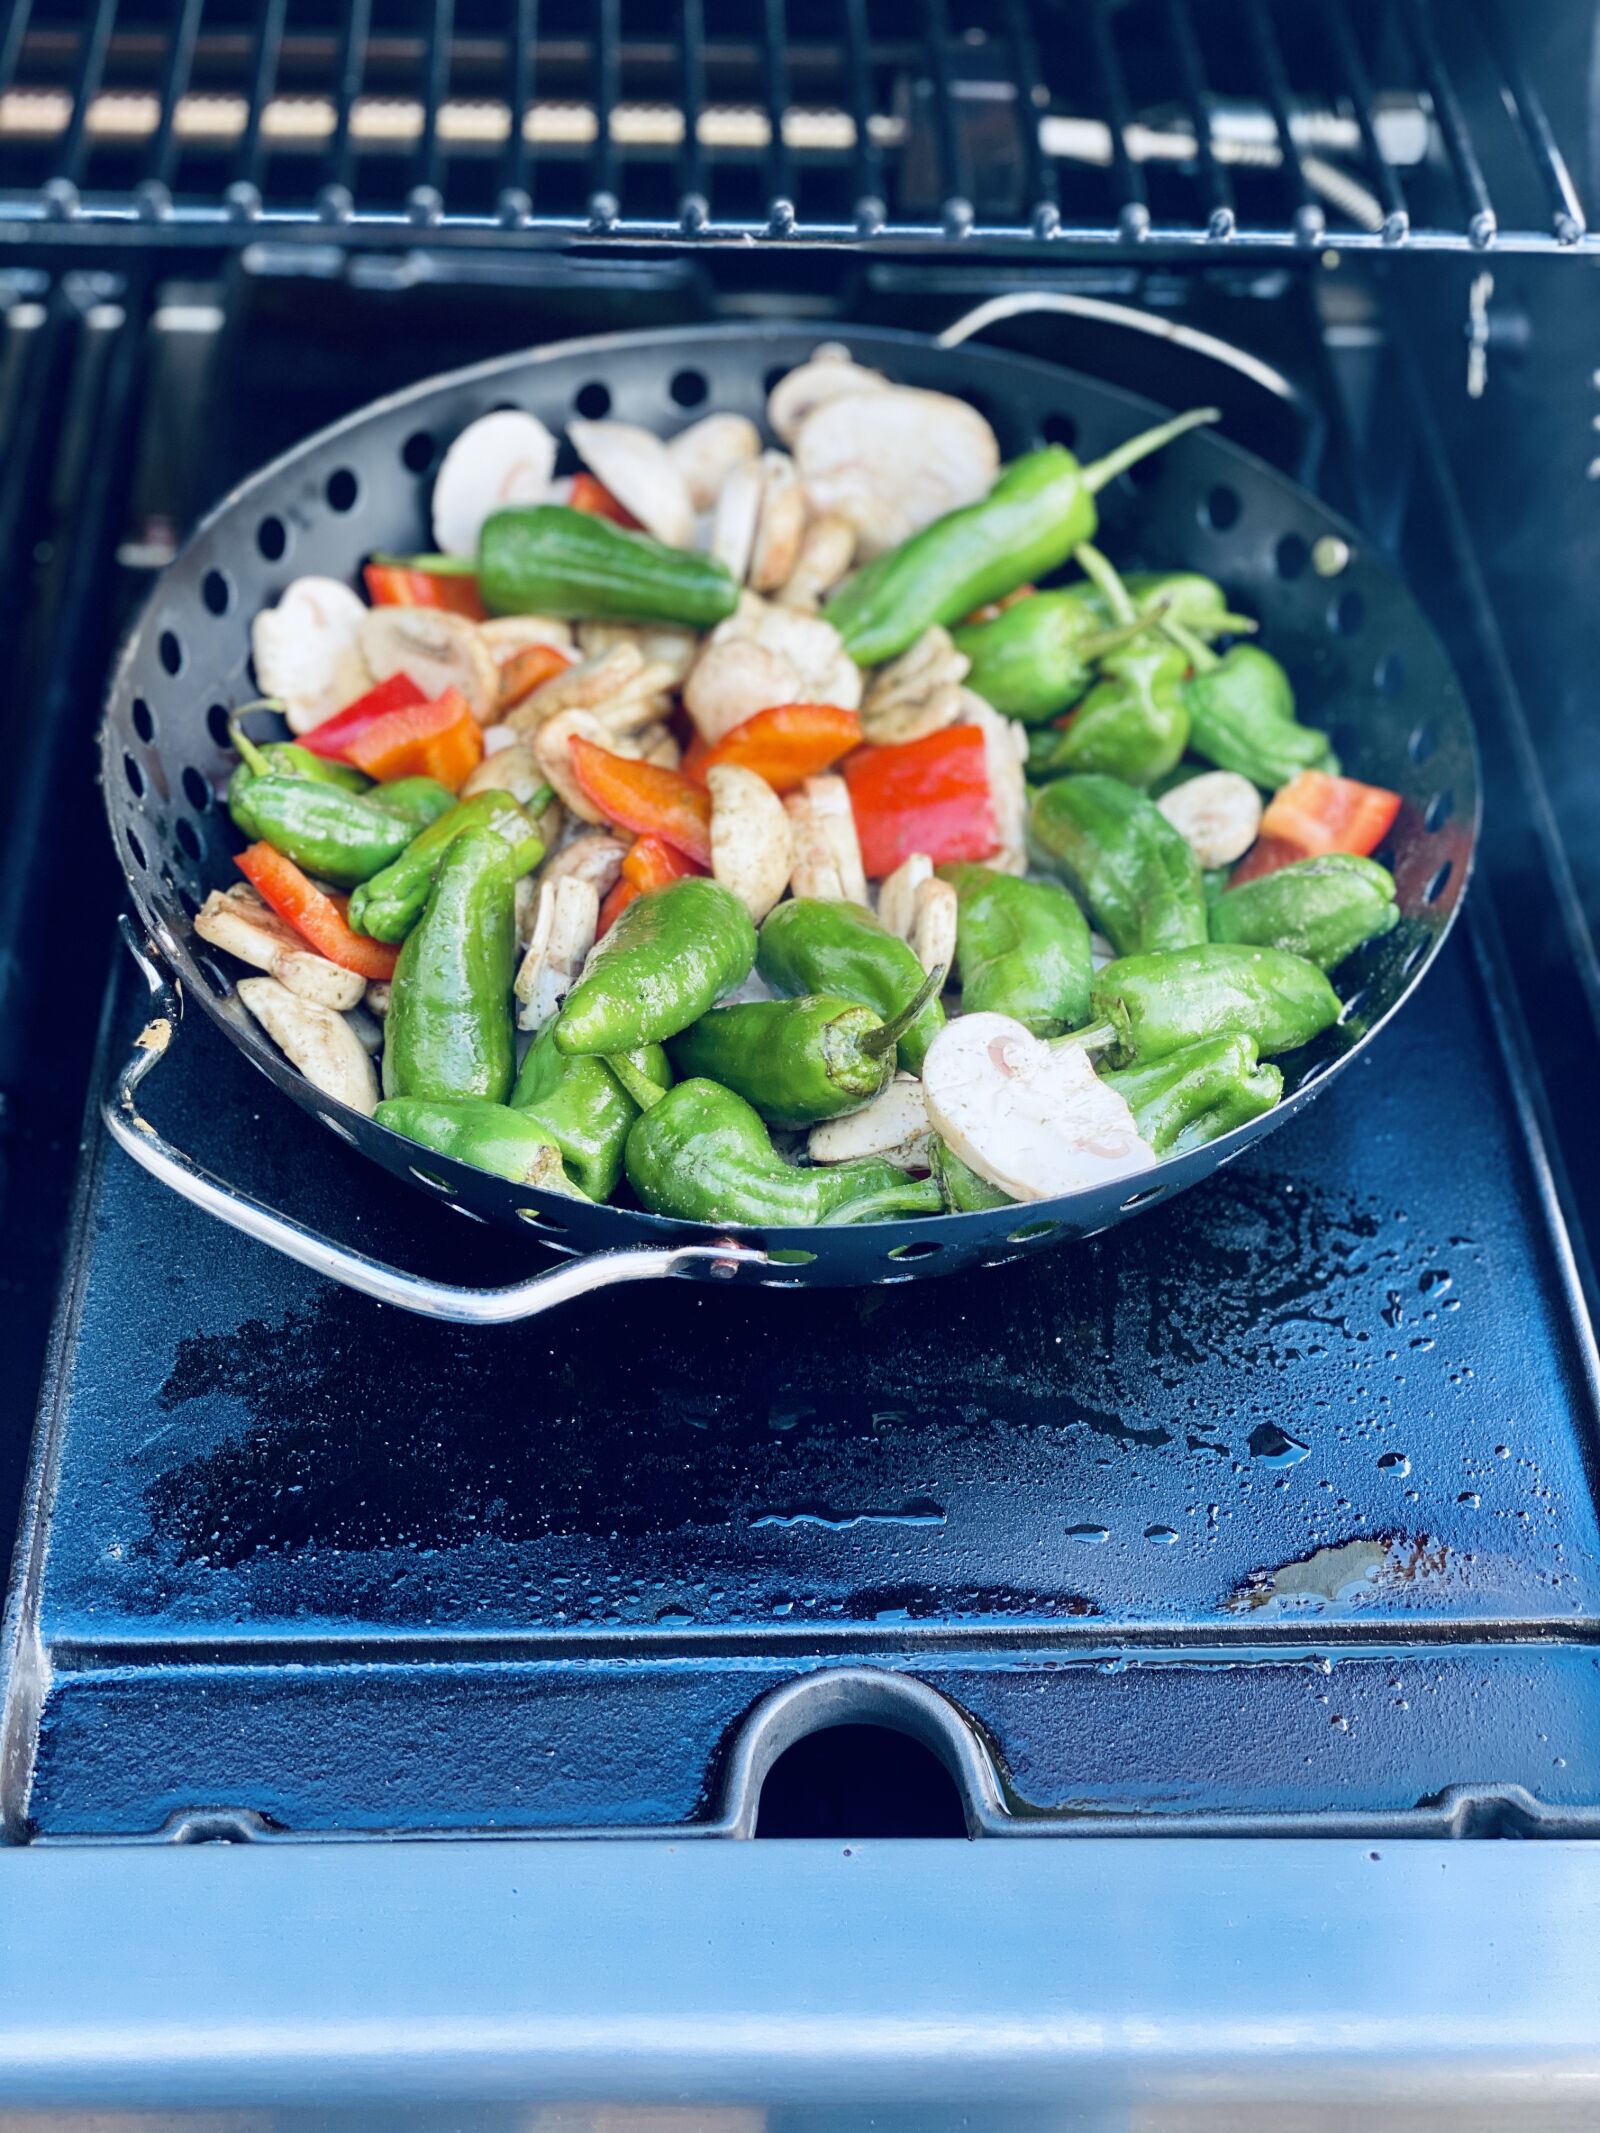 Apple iPhone 11 Pro + iPhone 11 Pro back dual camera 6mm f/2 sample photo. Barbecue, vegetables, vegetable pan photography